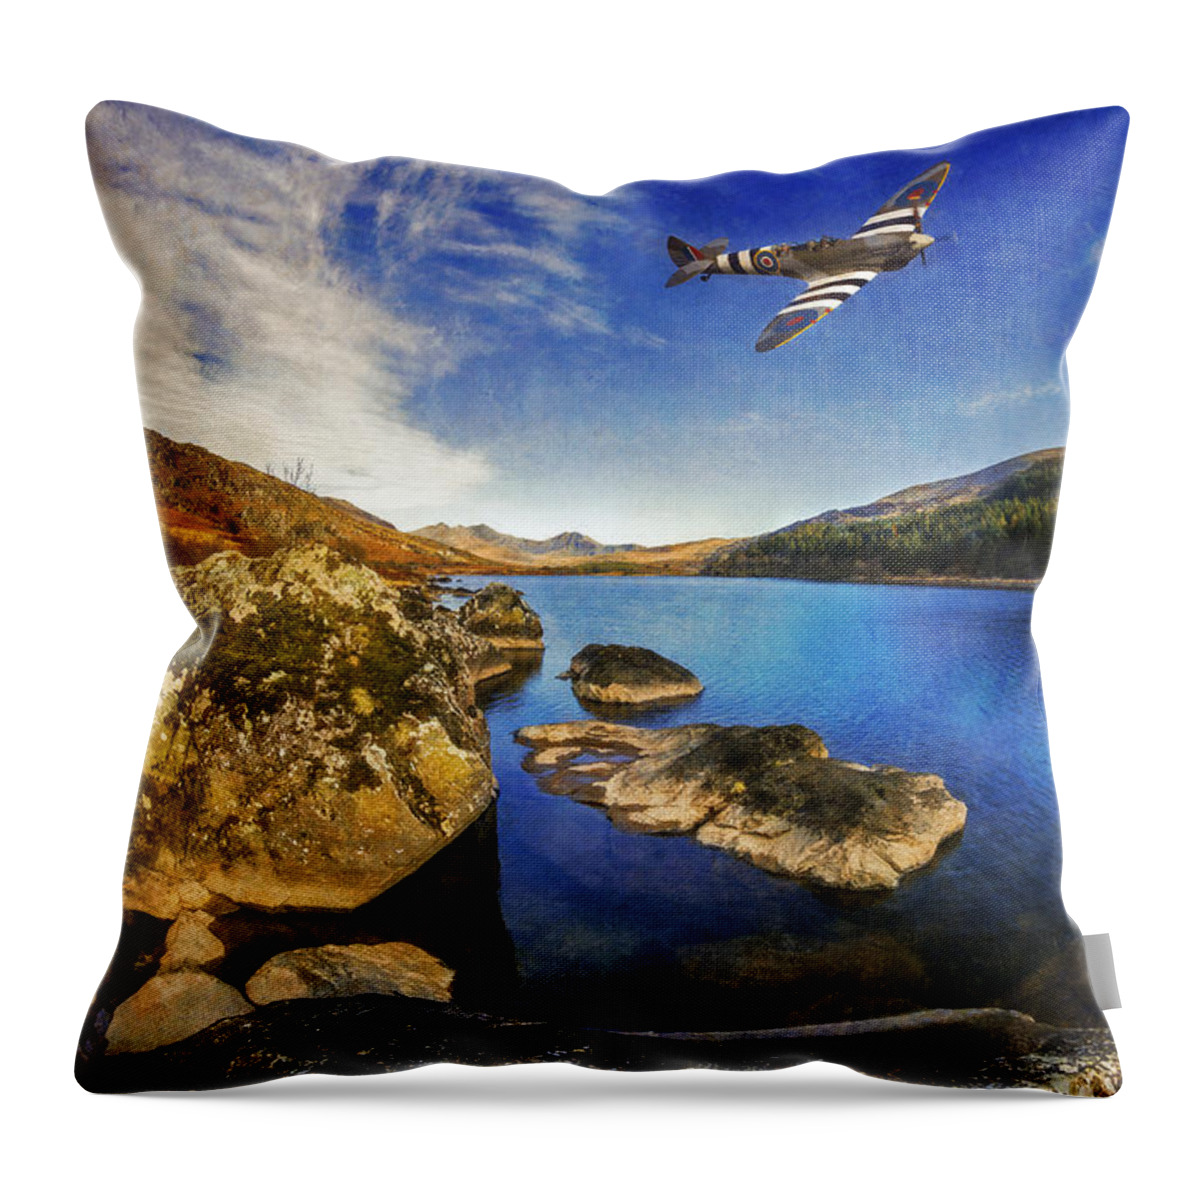 War Throw Pillow featuring the photograph Spitfire Lake by Ian Mitchell